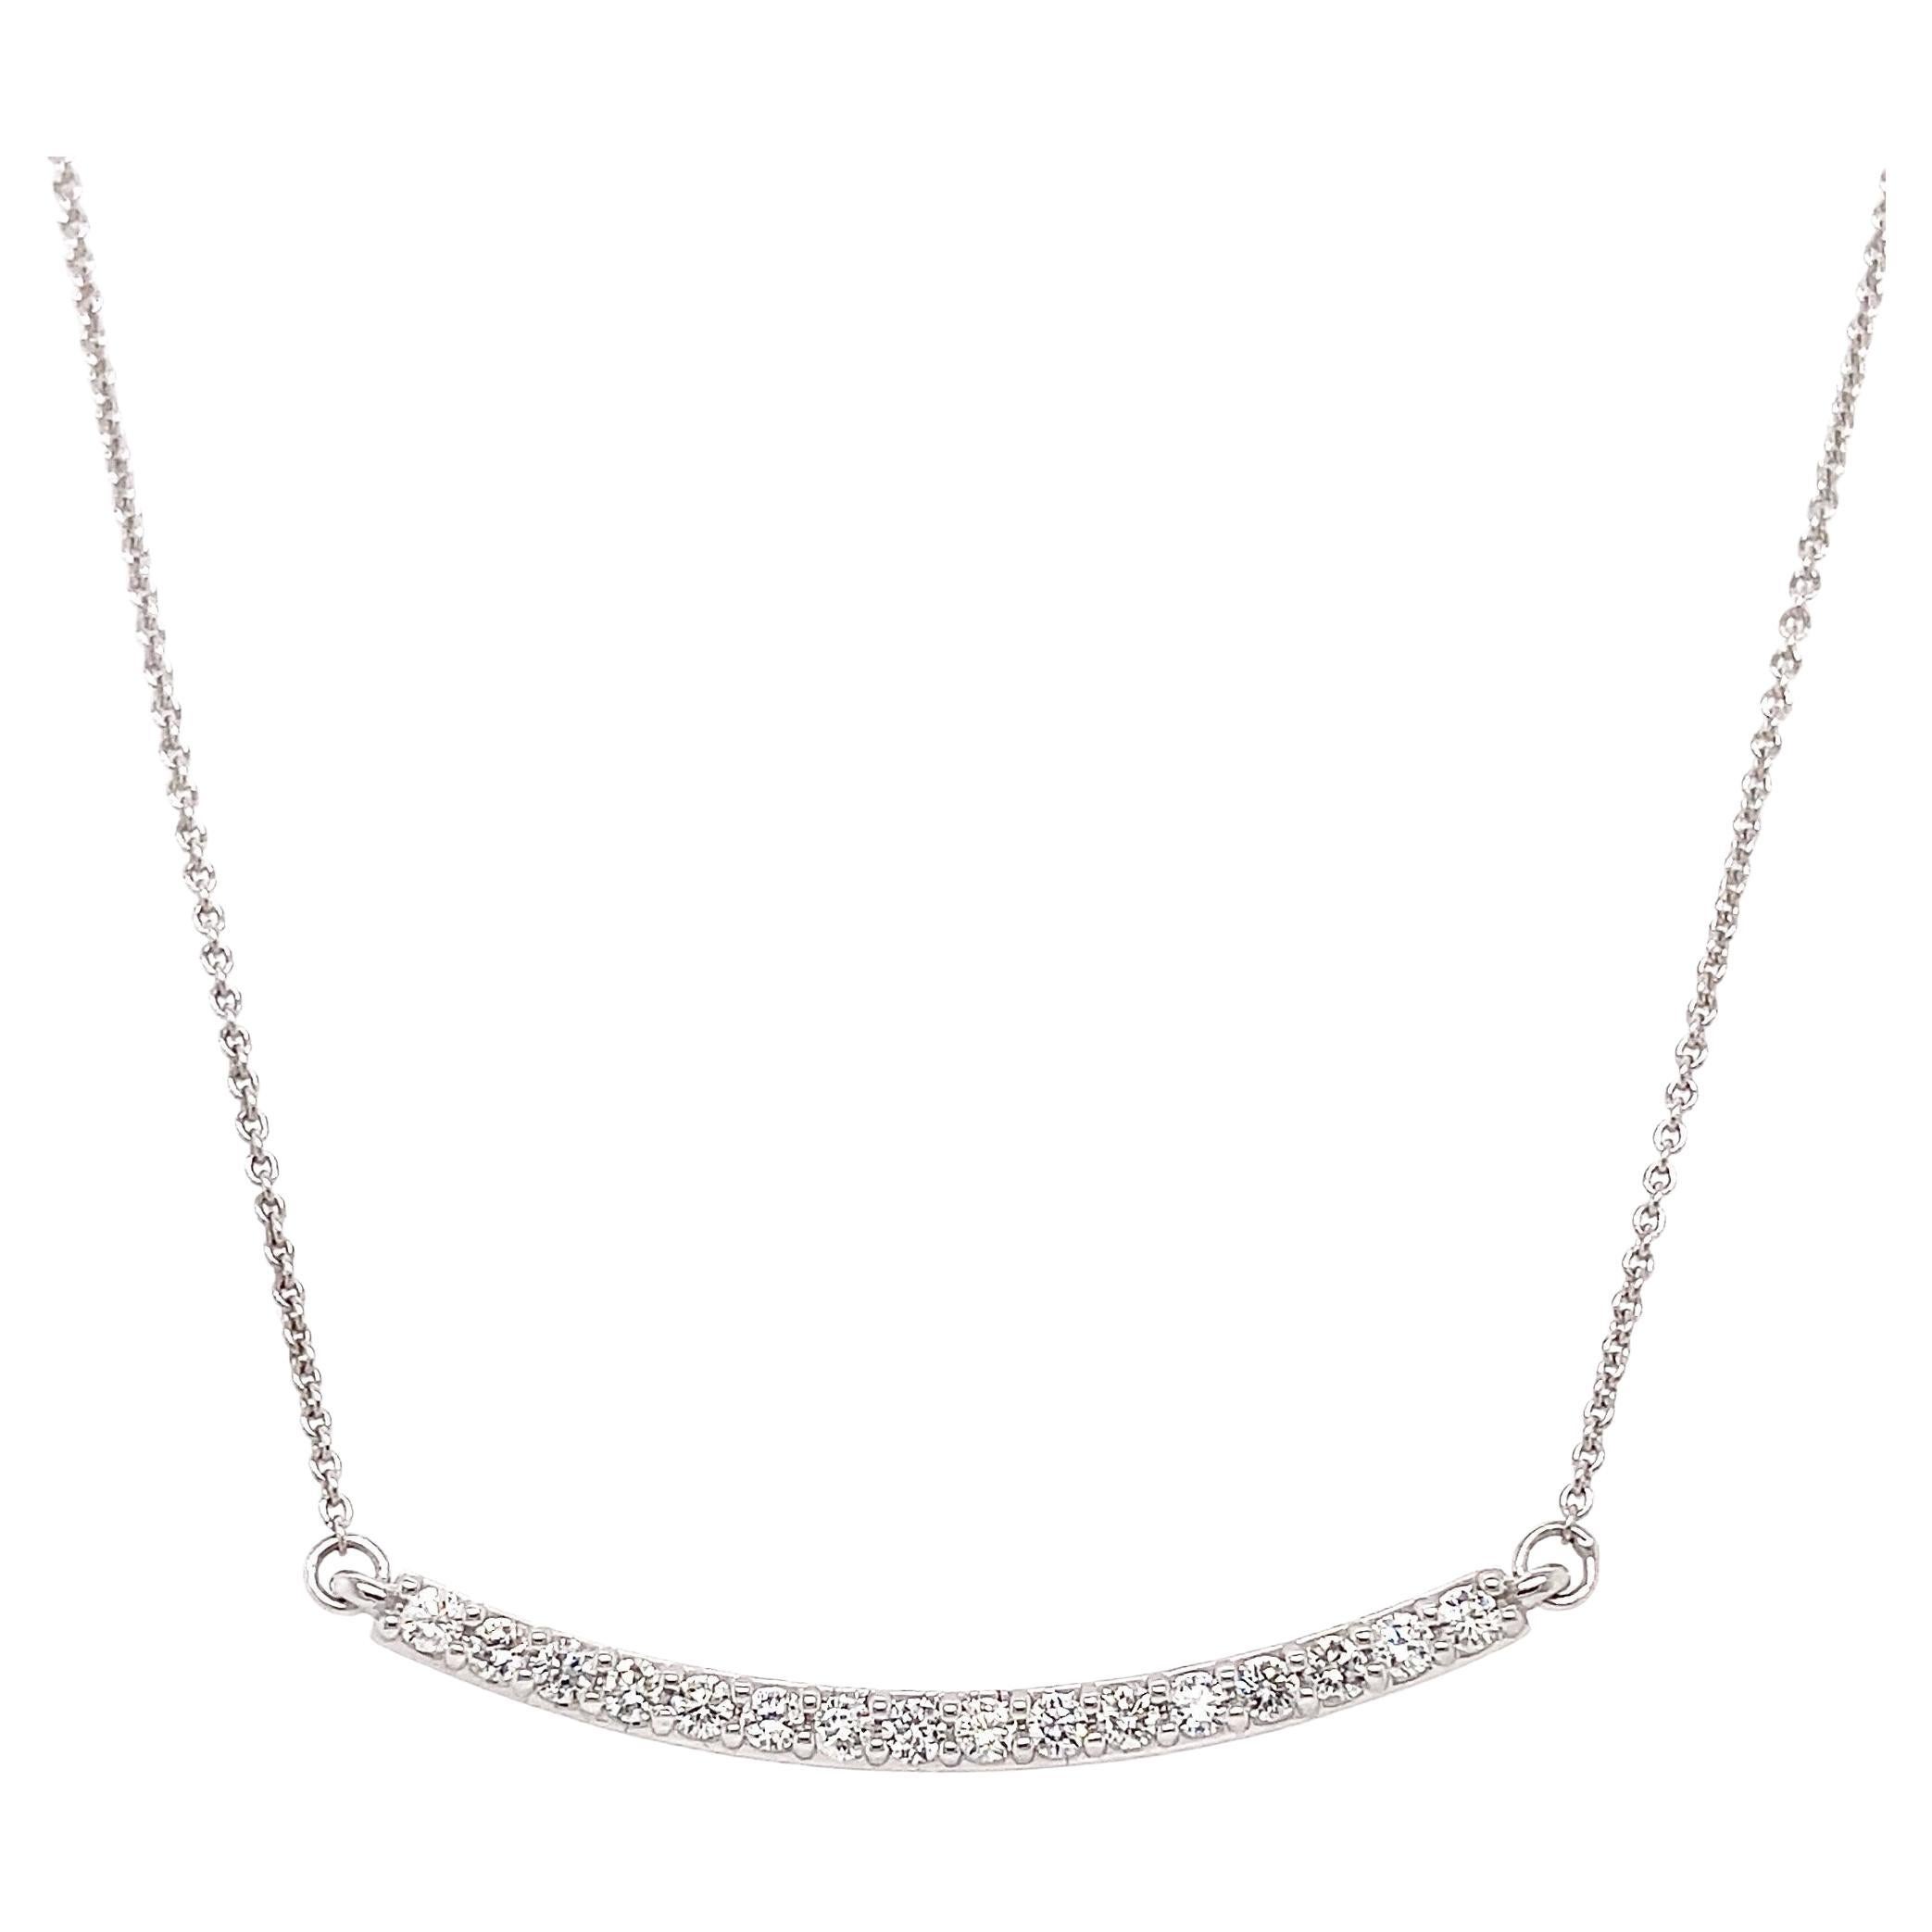 0.48 Carat Diamond Pave Bar Pendant Necklace in 14K White Gold on Chain For Sale